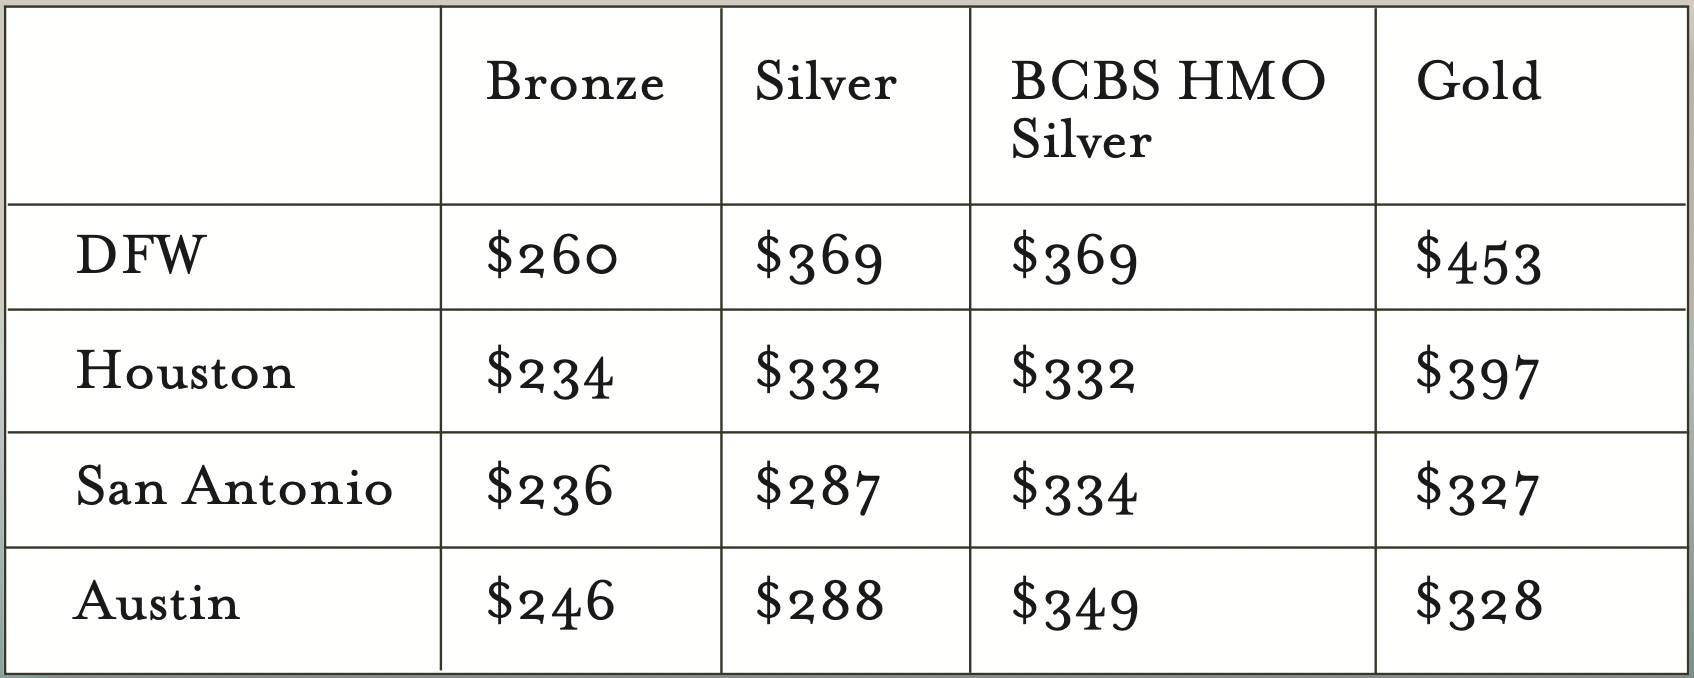 This table compares the lowest-priced premiums for a 50-year old by plan type and Texas city.